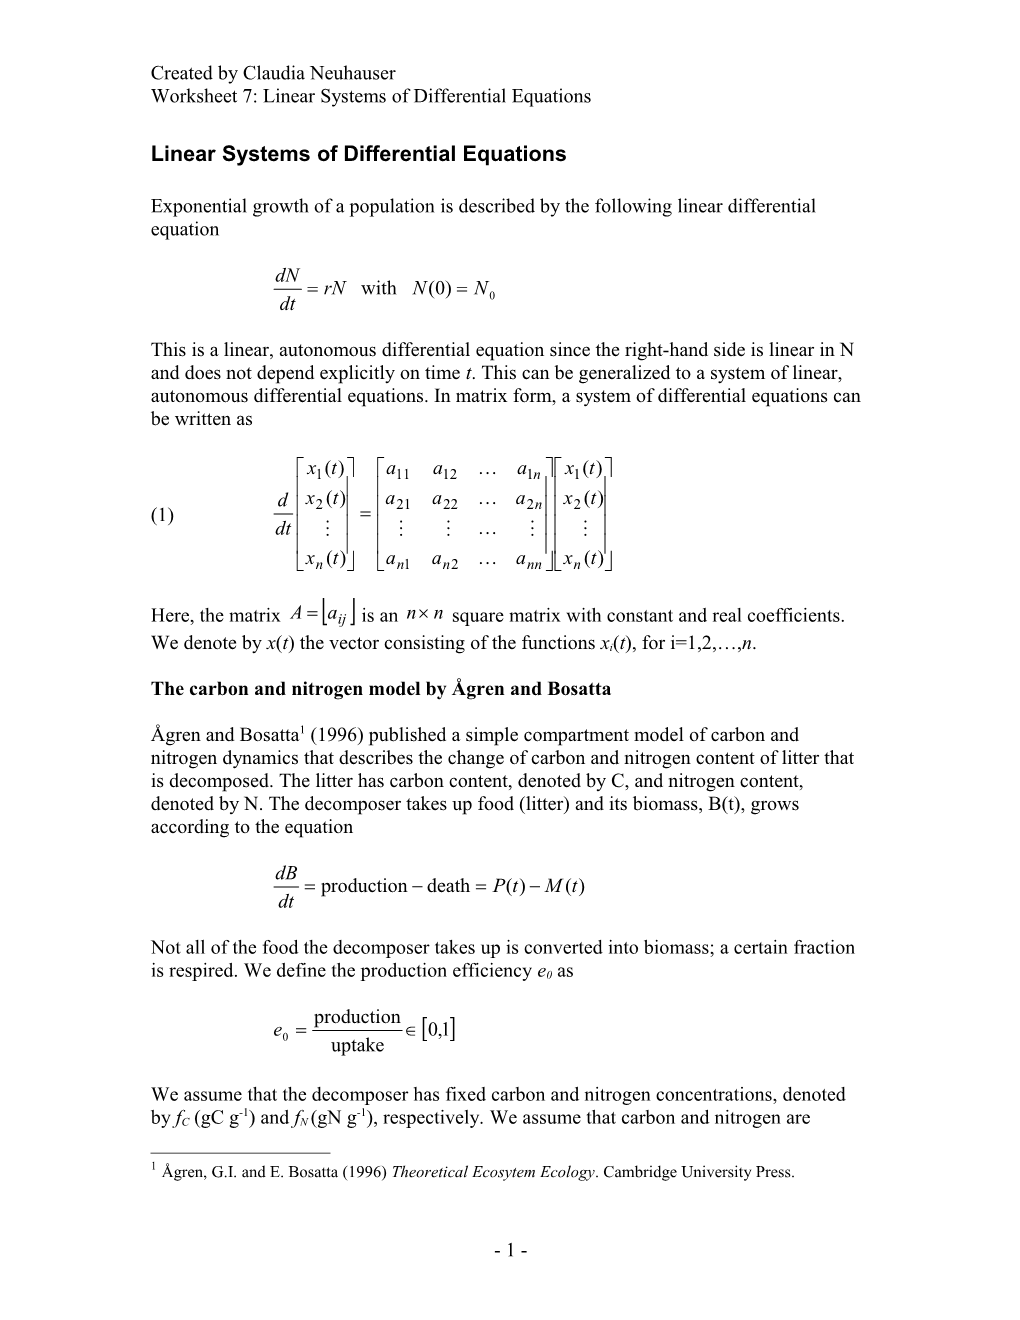 Linear Systems of Differential Equations